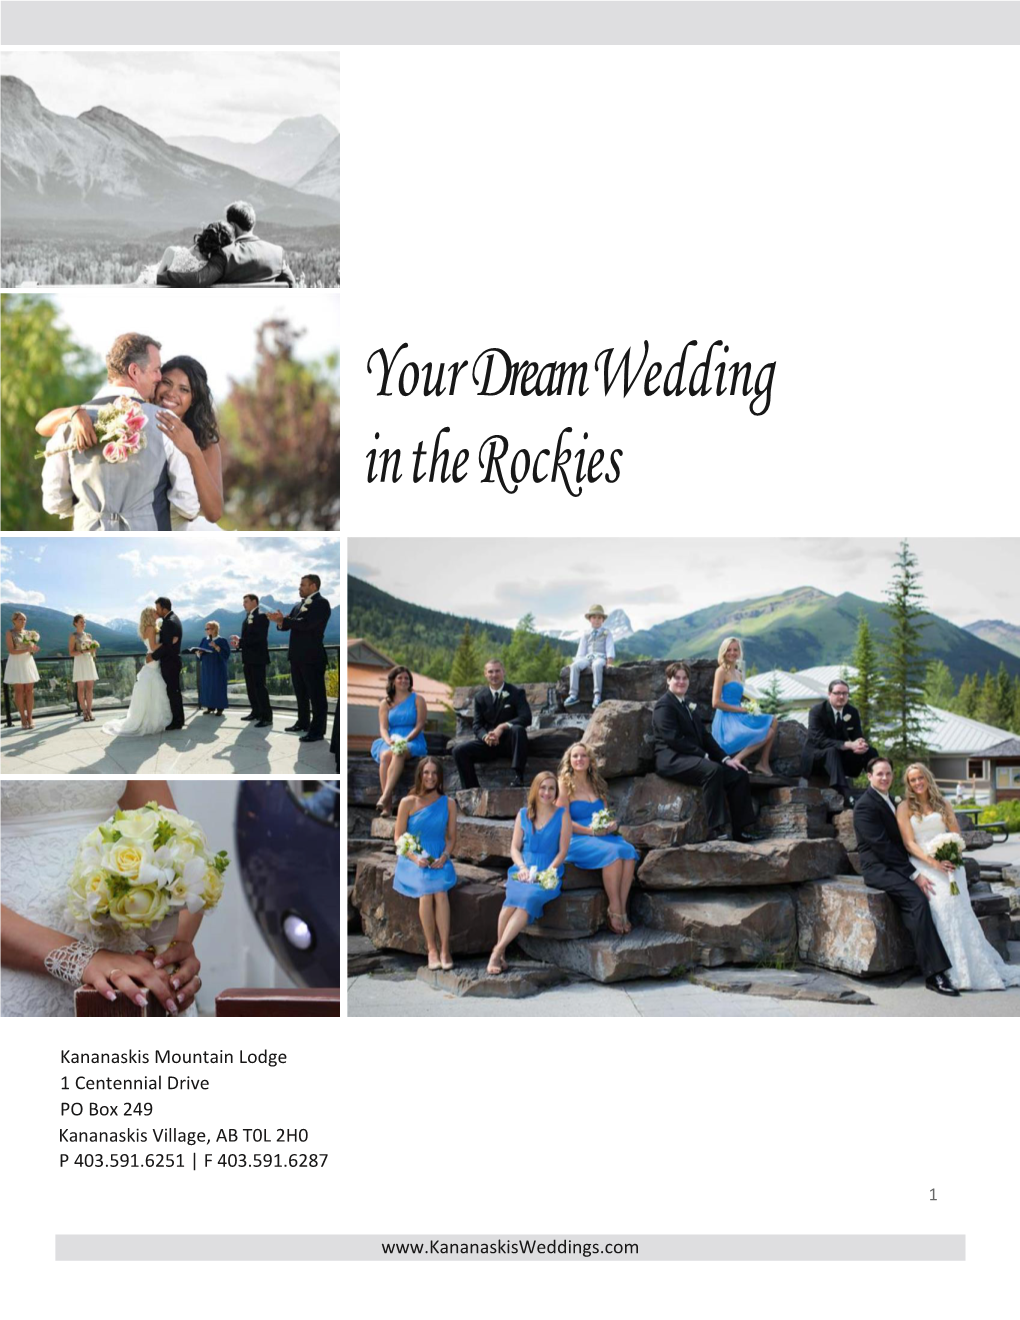 Wedding Package the Kananaskis Mountain Lodge Is Pleased to Offer Your Guests Relaxing, Luxurious Guestrooms at a Discounted Room Rate